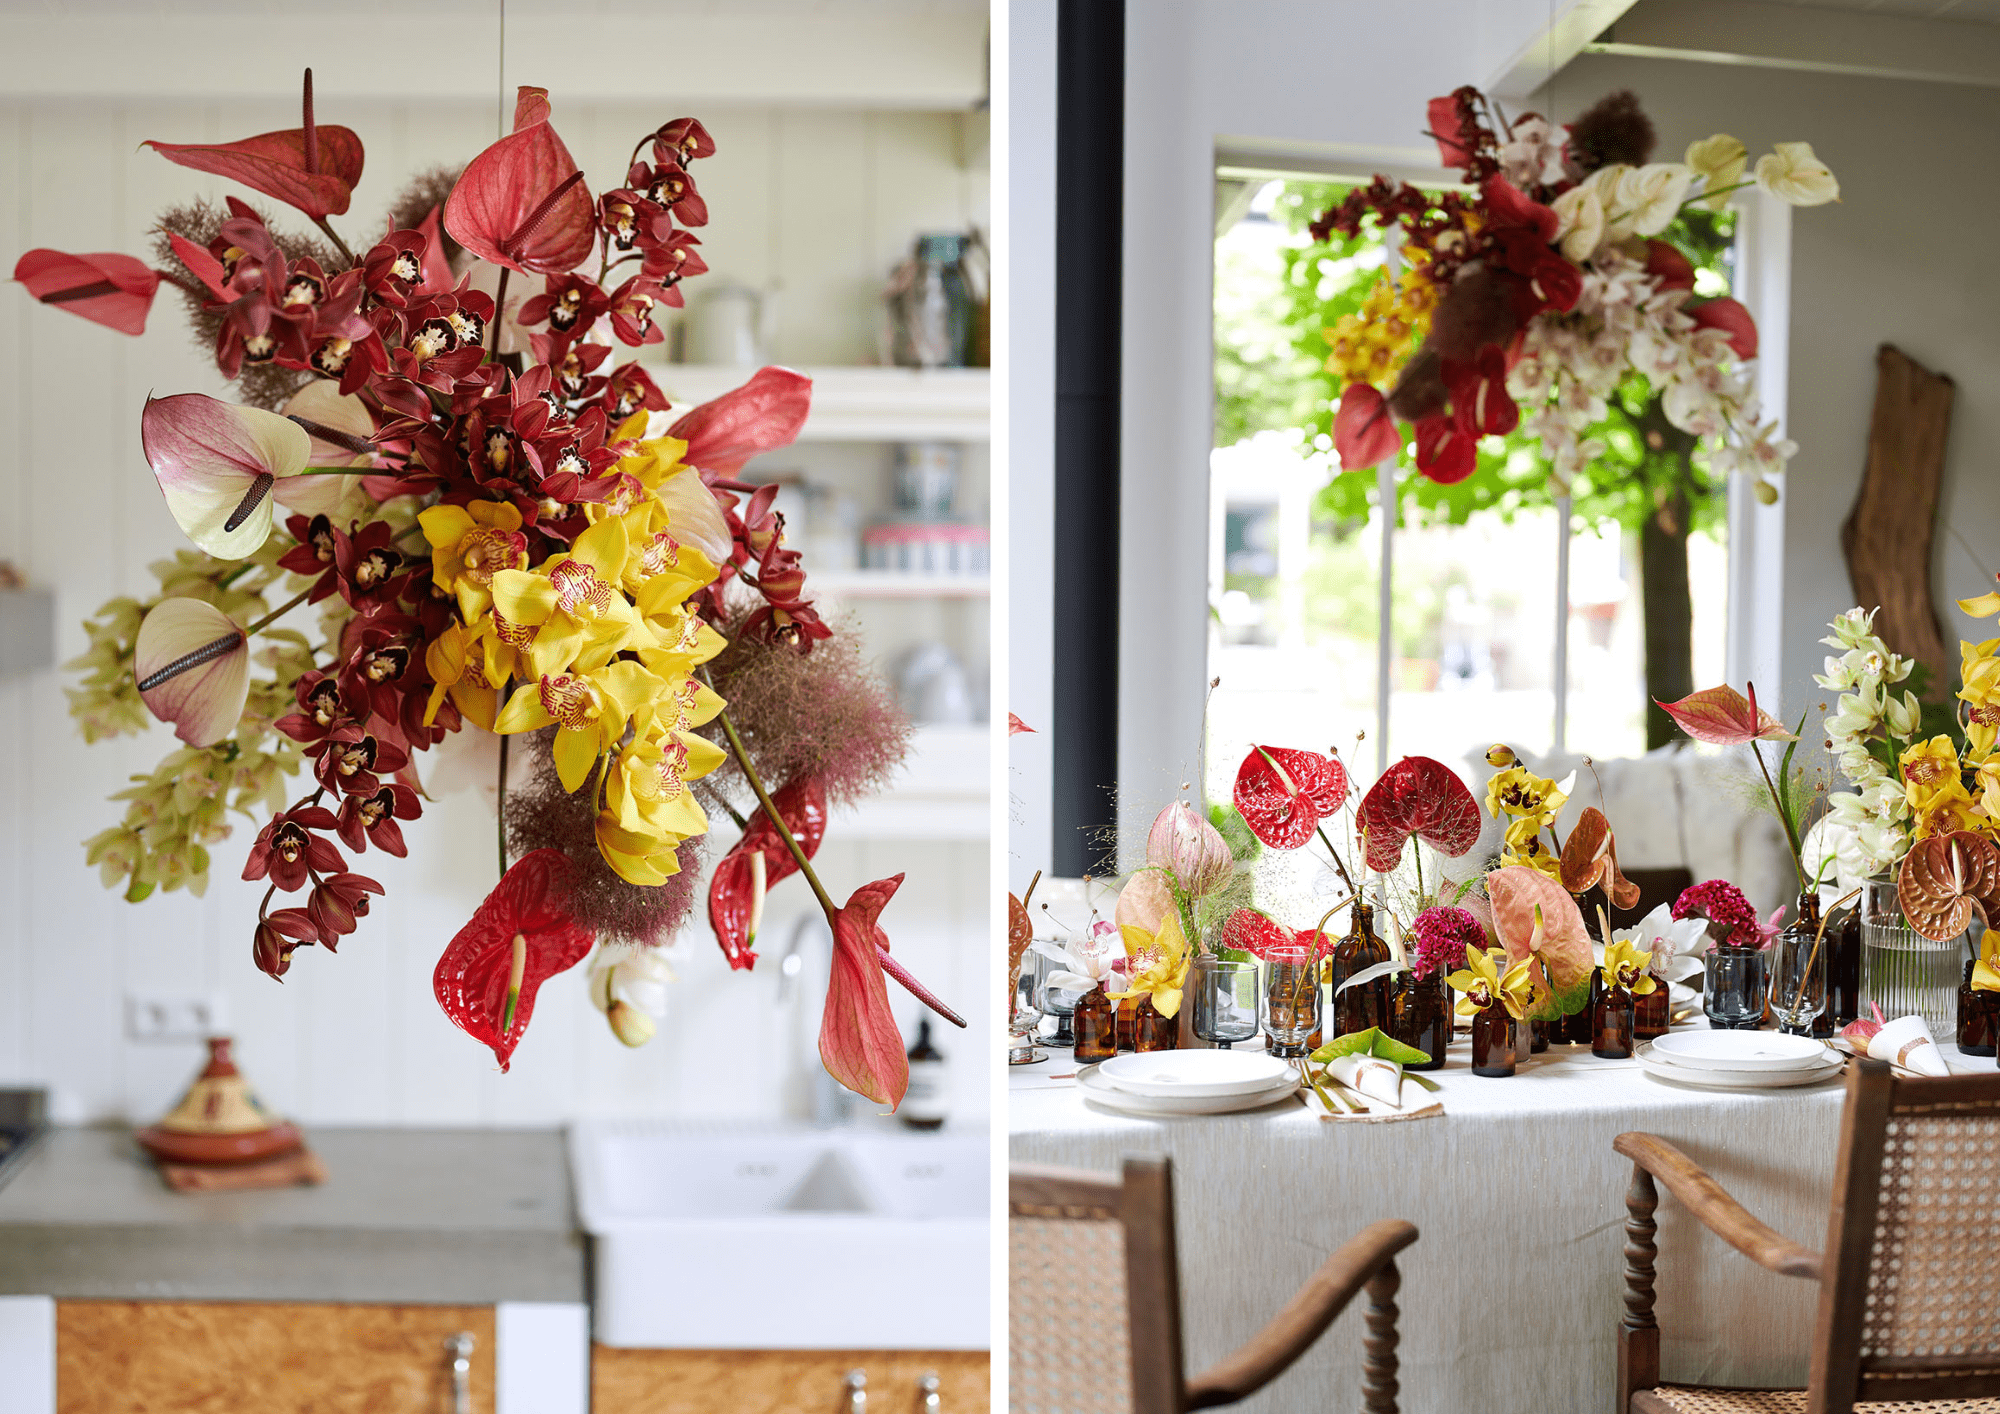 December decorations with Anthuriums